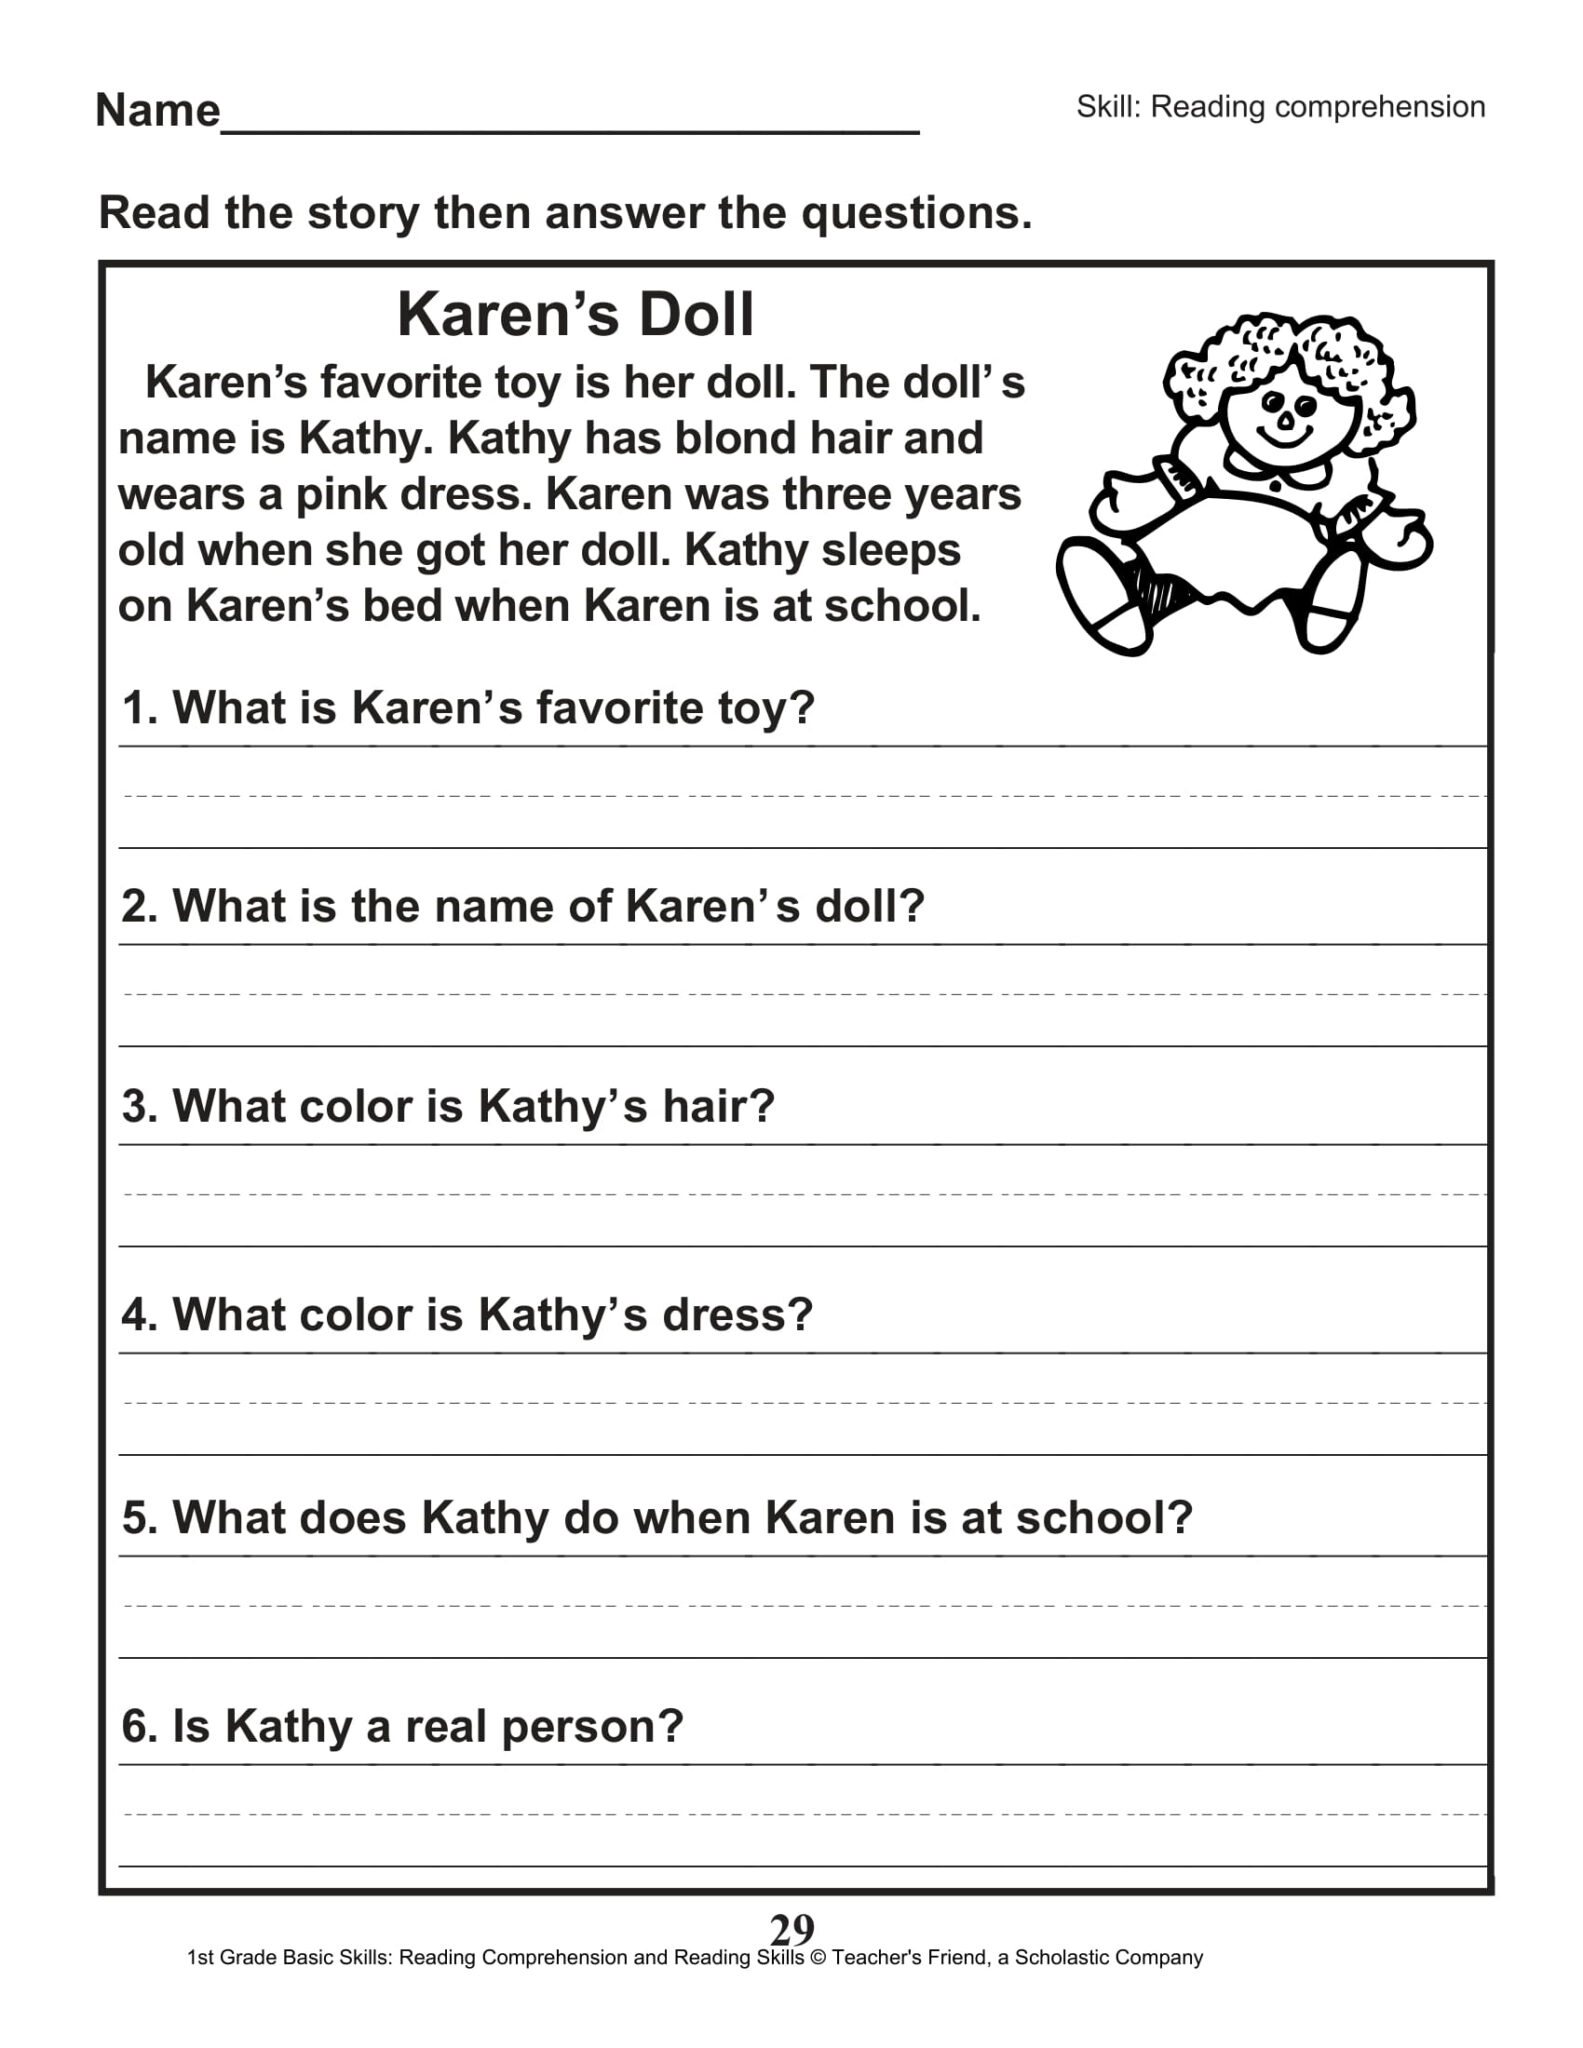 reading-comprehension-2nd-grade-multiple-choice-first-pdf